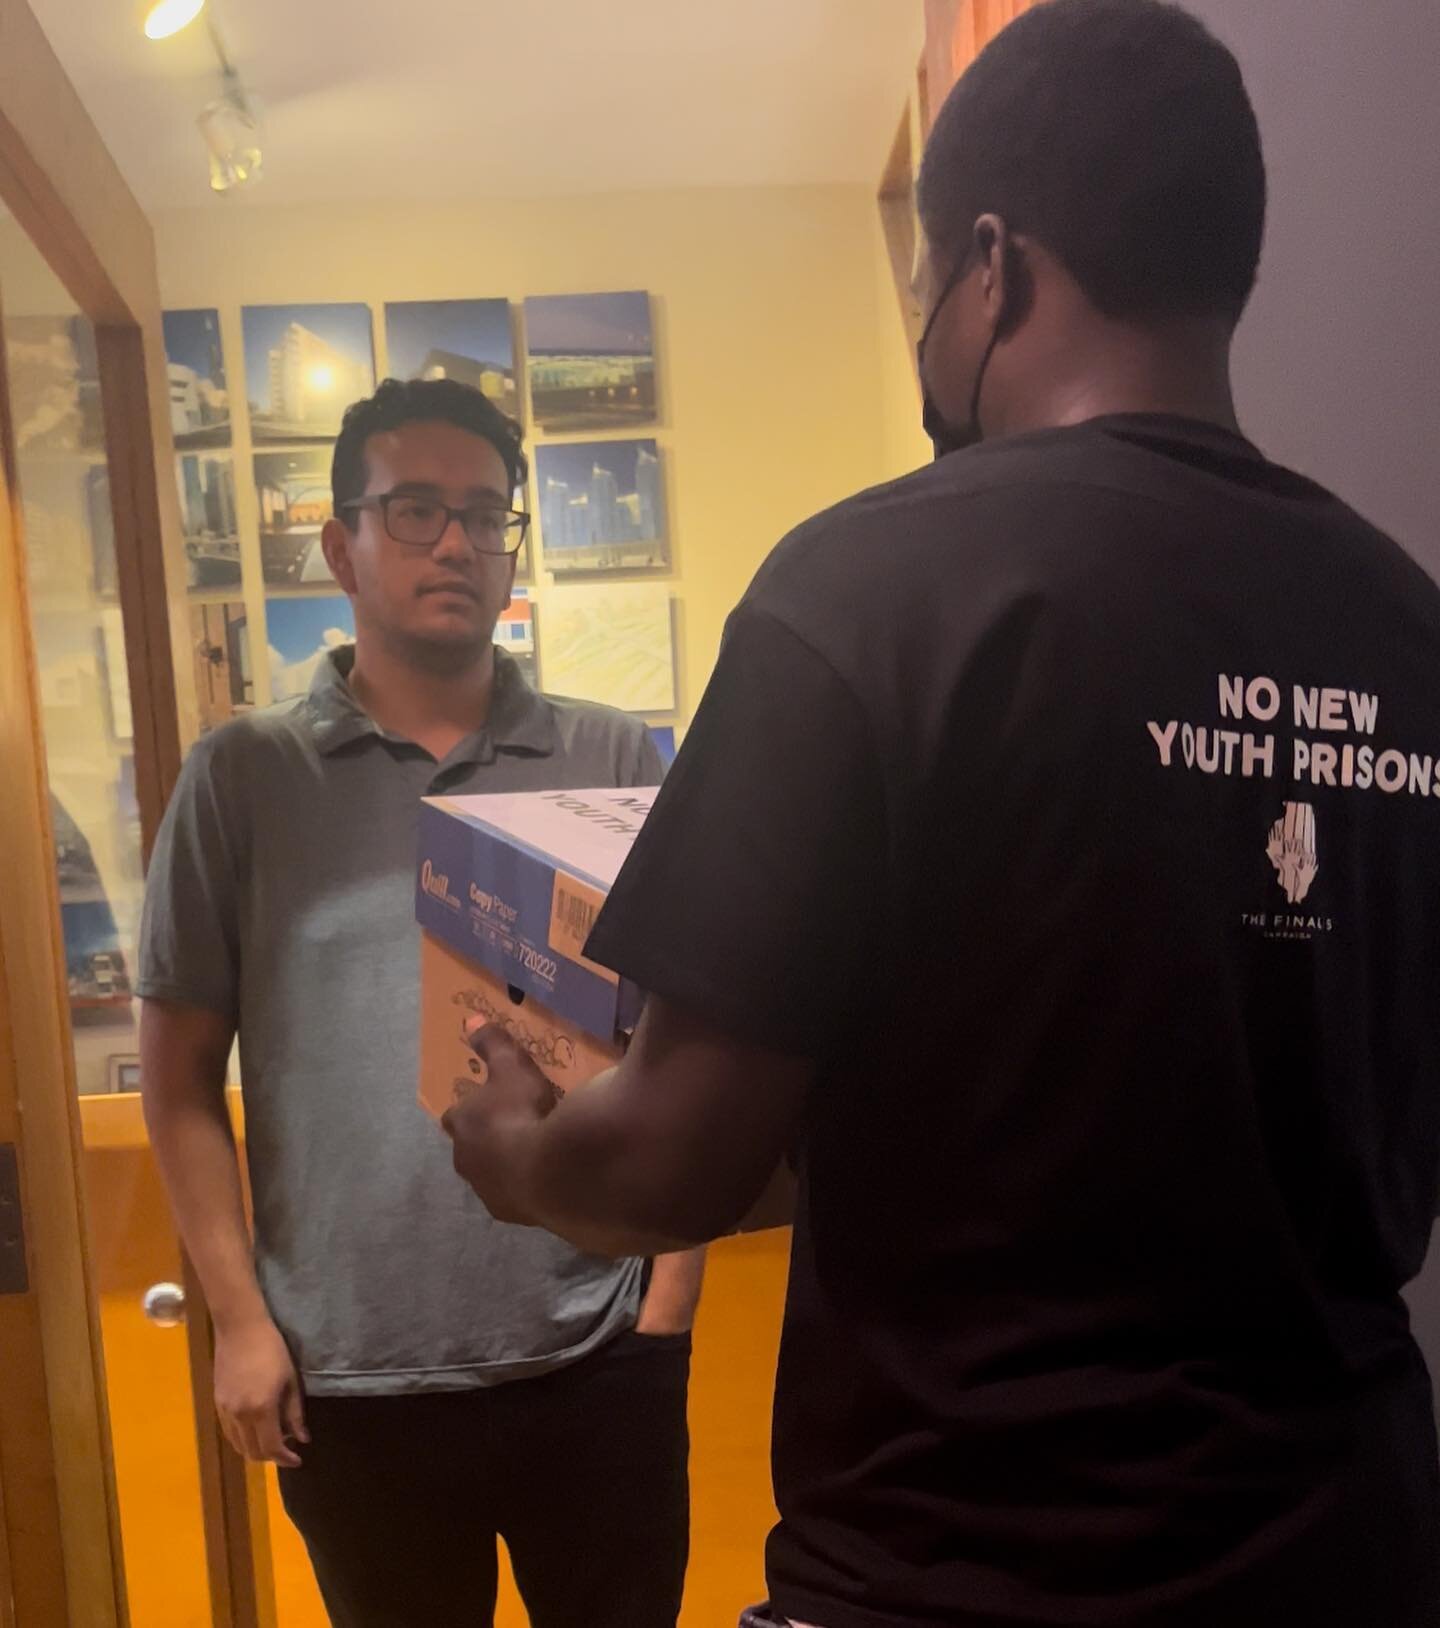 Last week we demanded that @cordoganclark cease work on the new youth prison in Lincoln, IL. We delivered our petition with nearly 600 signatures of people who support our demand to #StopLDC and demanded to speak with the higher ups. We eventually go